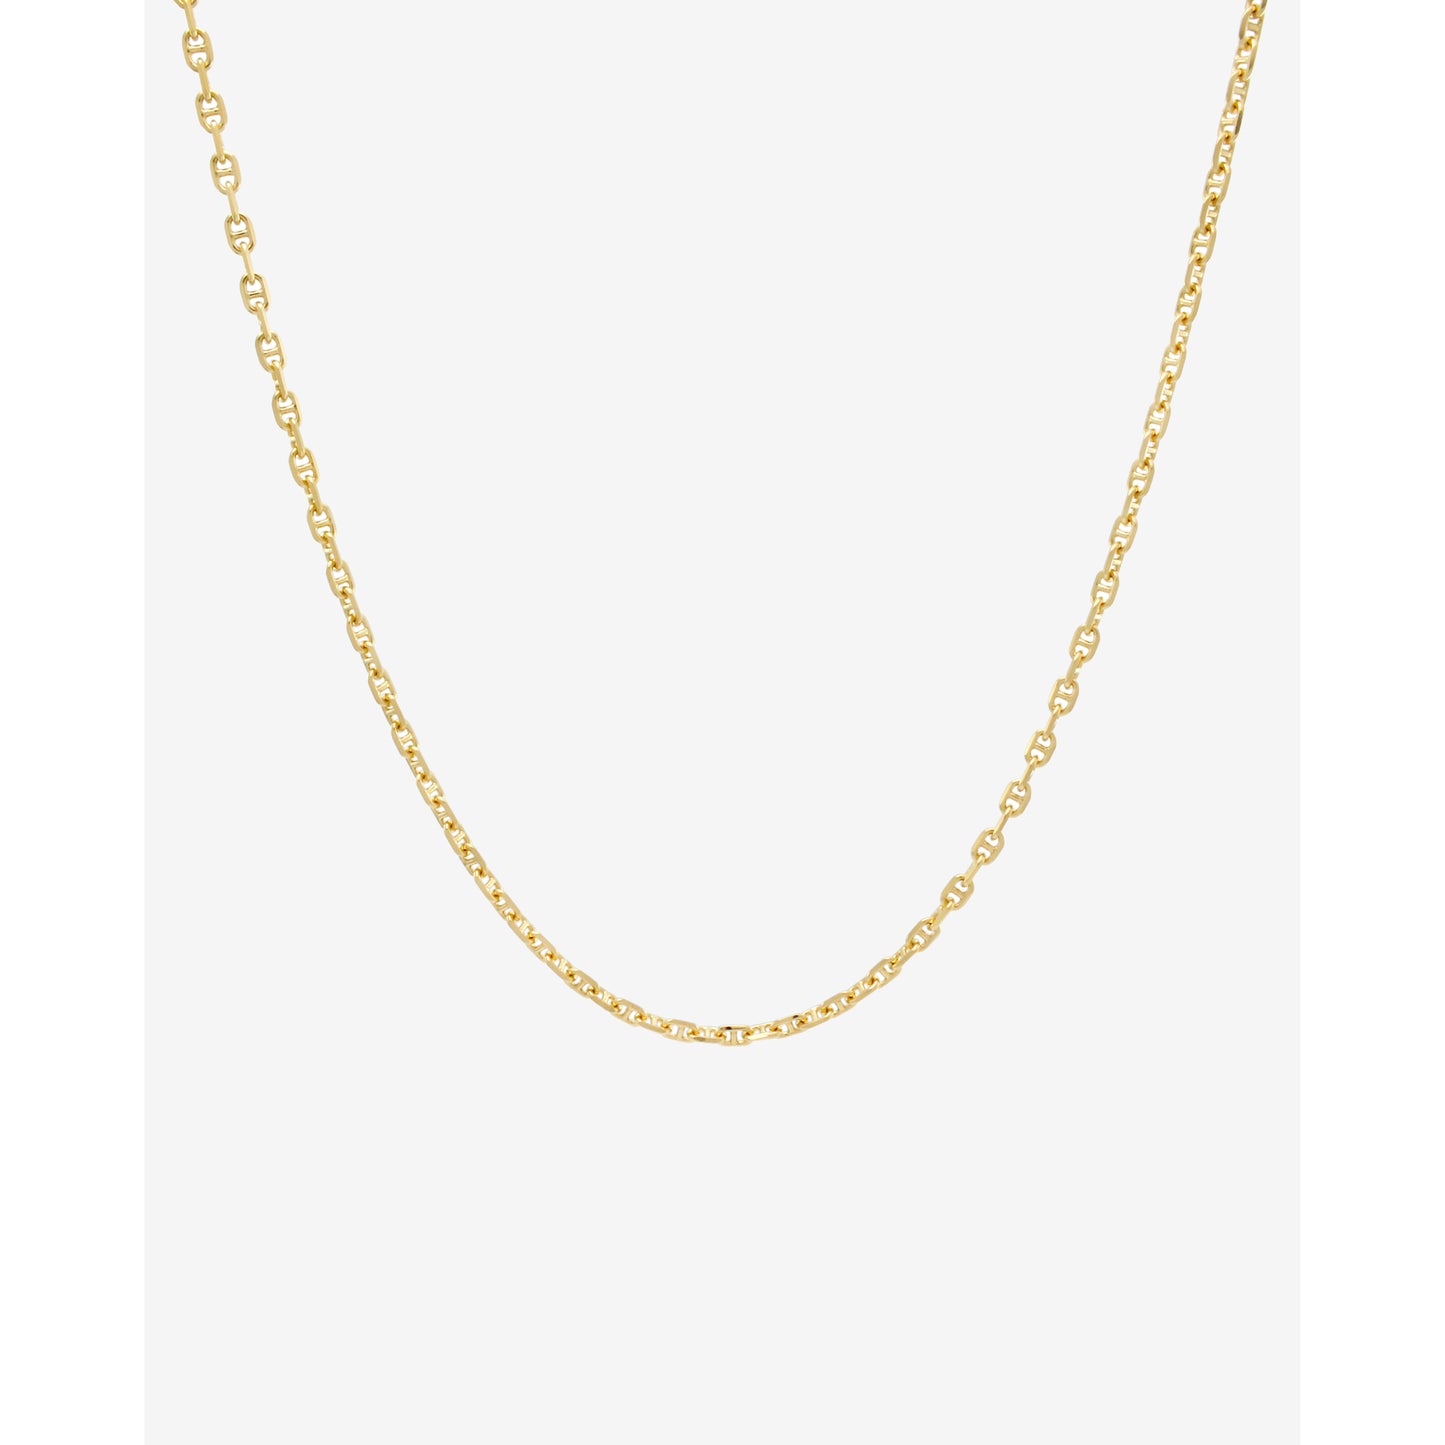 Chunky Anchor Long Chain Necklace in Gold